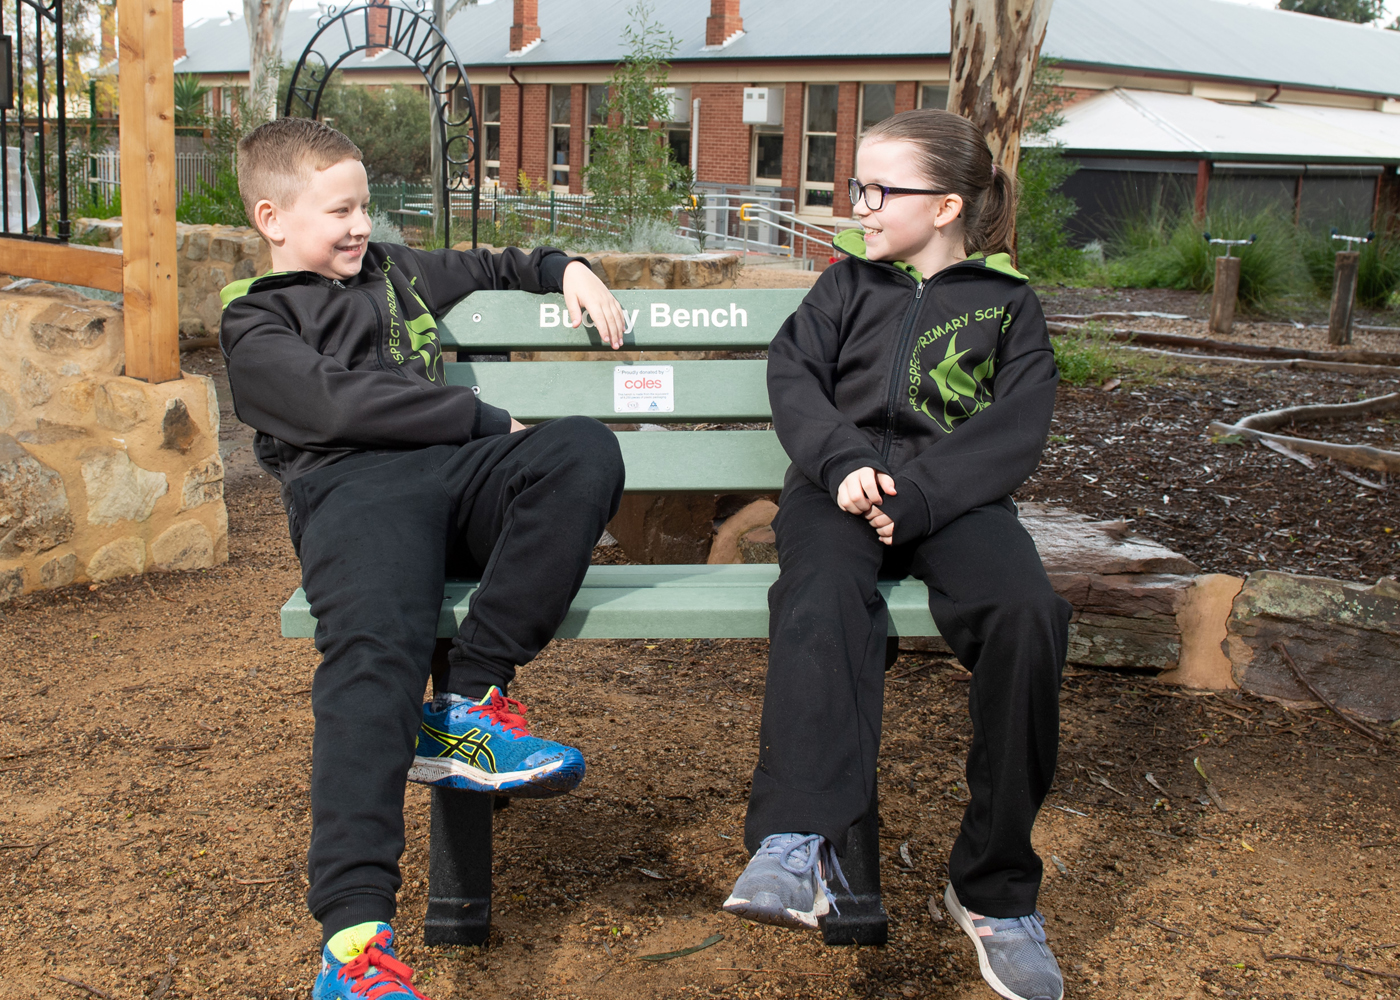 Two Primary School students sitting on an outdoor bench made from 98% recycled plastic